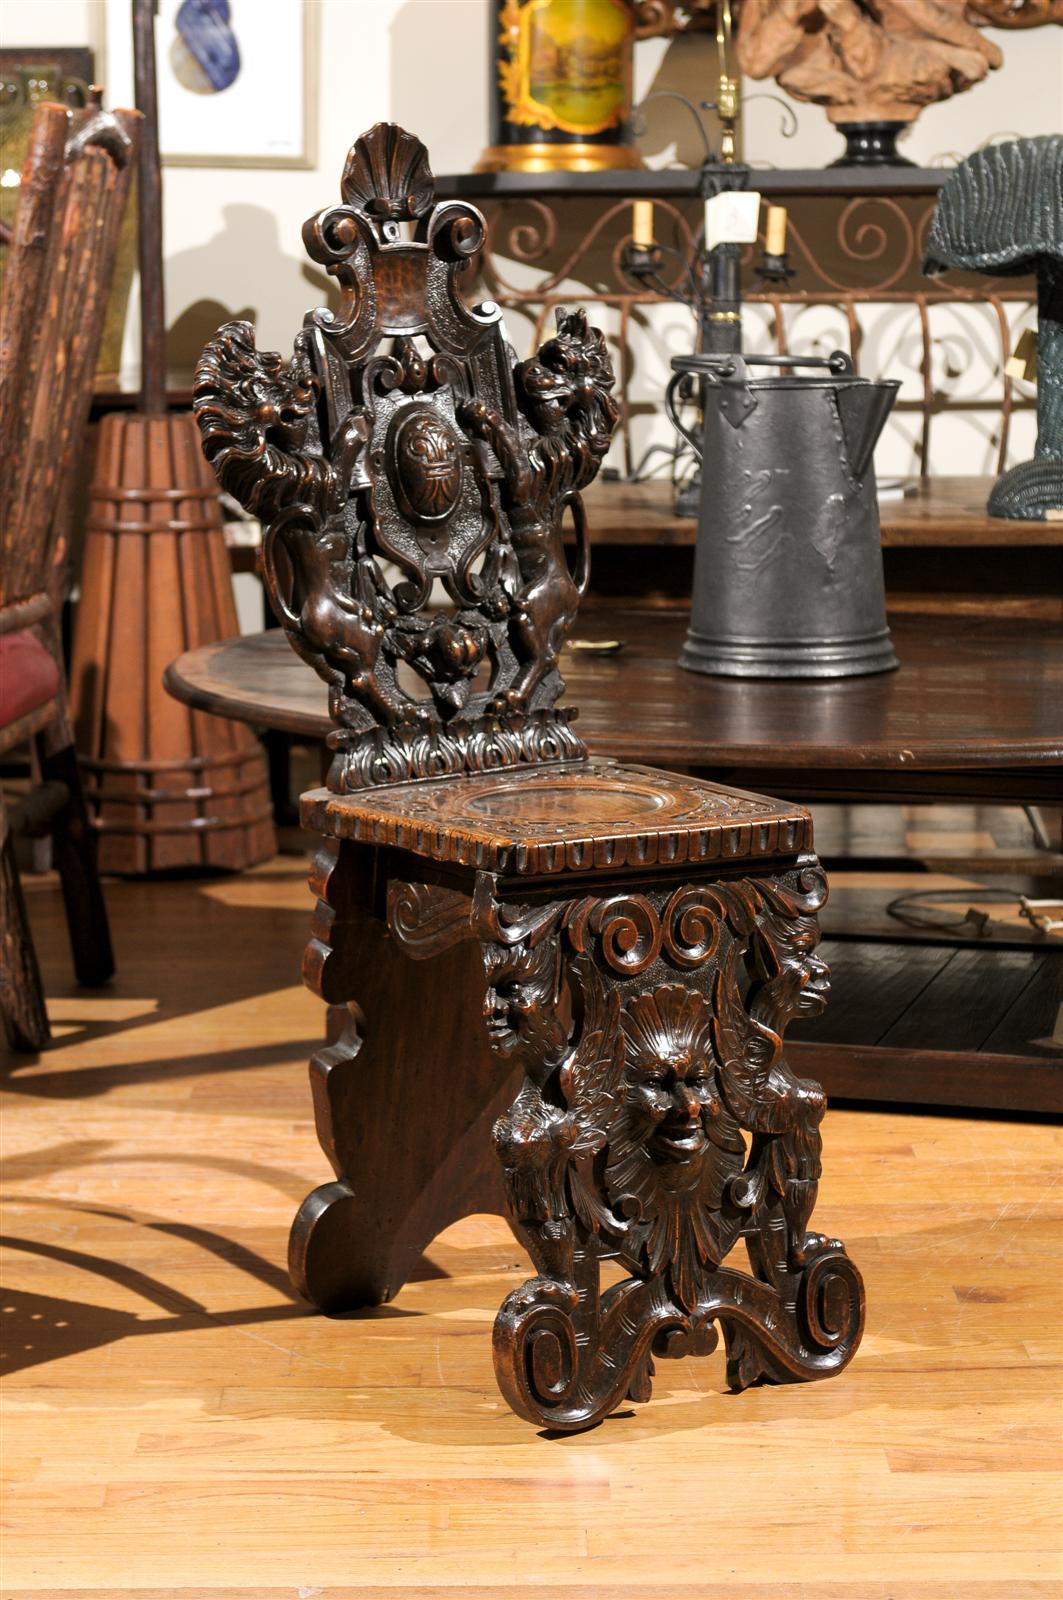 This is a 18th Century Jacobean chair made from solid wood.  It was hand carved by a joiner and has very intricate details on the front legs, back rest and seat top.